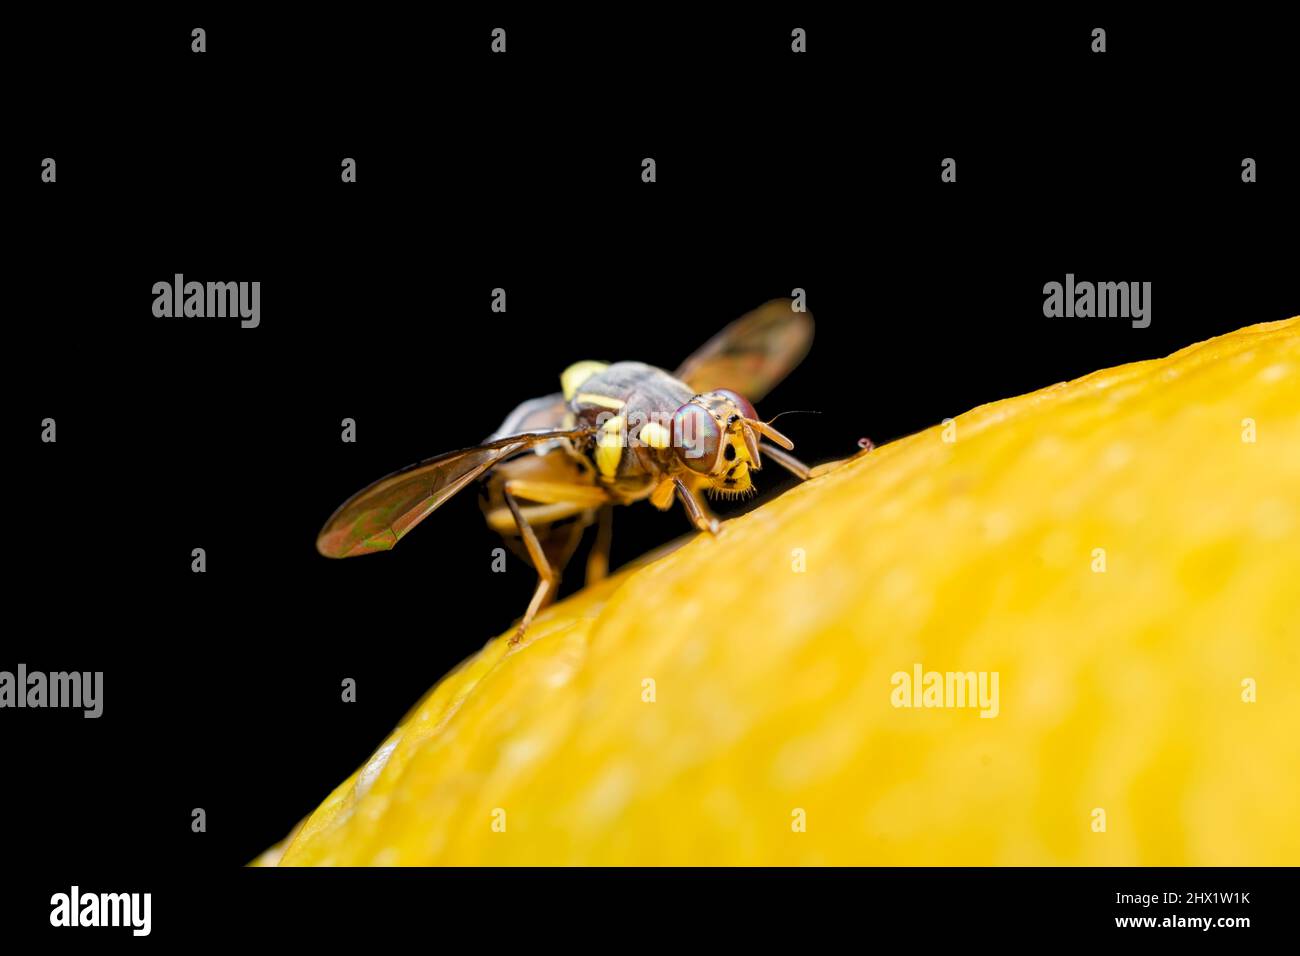 Melon fruit fly on the surface of the mango fruit. It is a serious agricultural pest and most destructive pest of melons and related crops. Selective Stock Photo